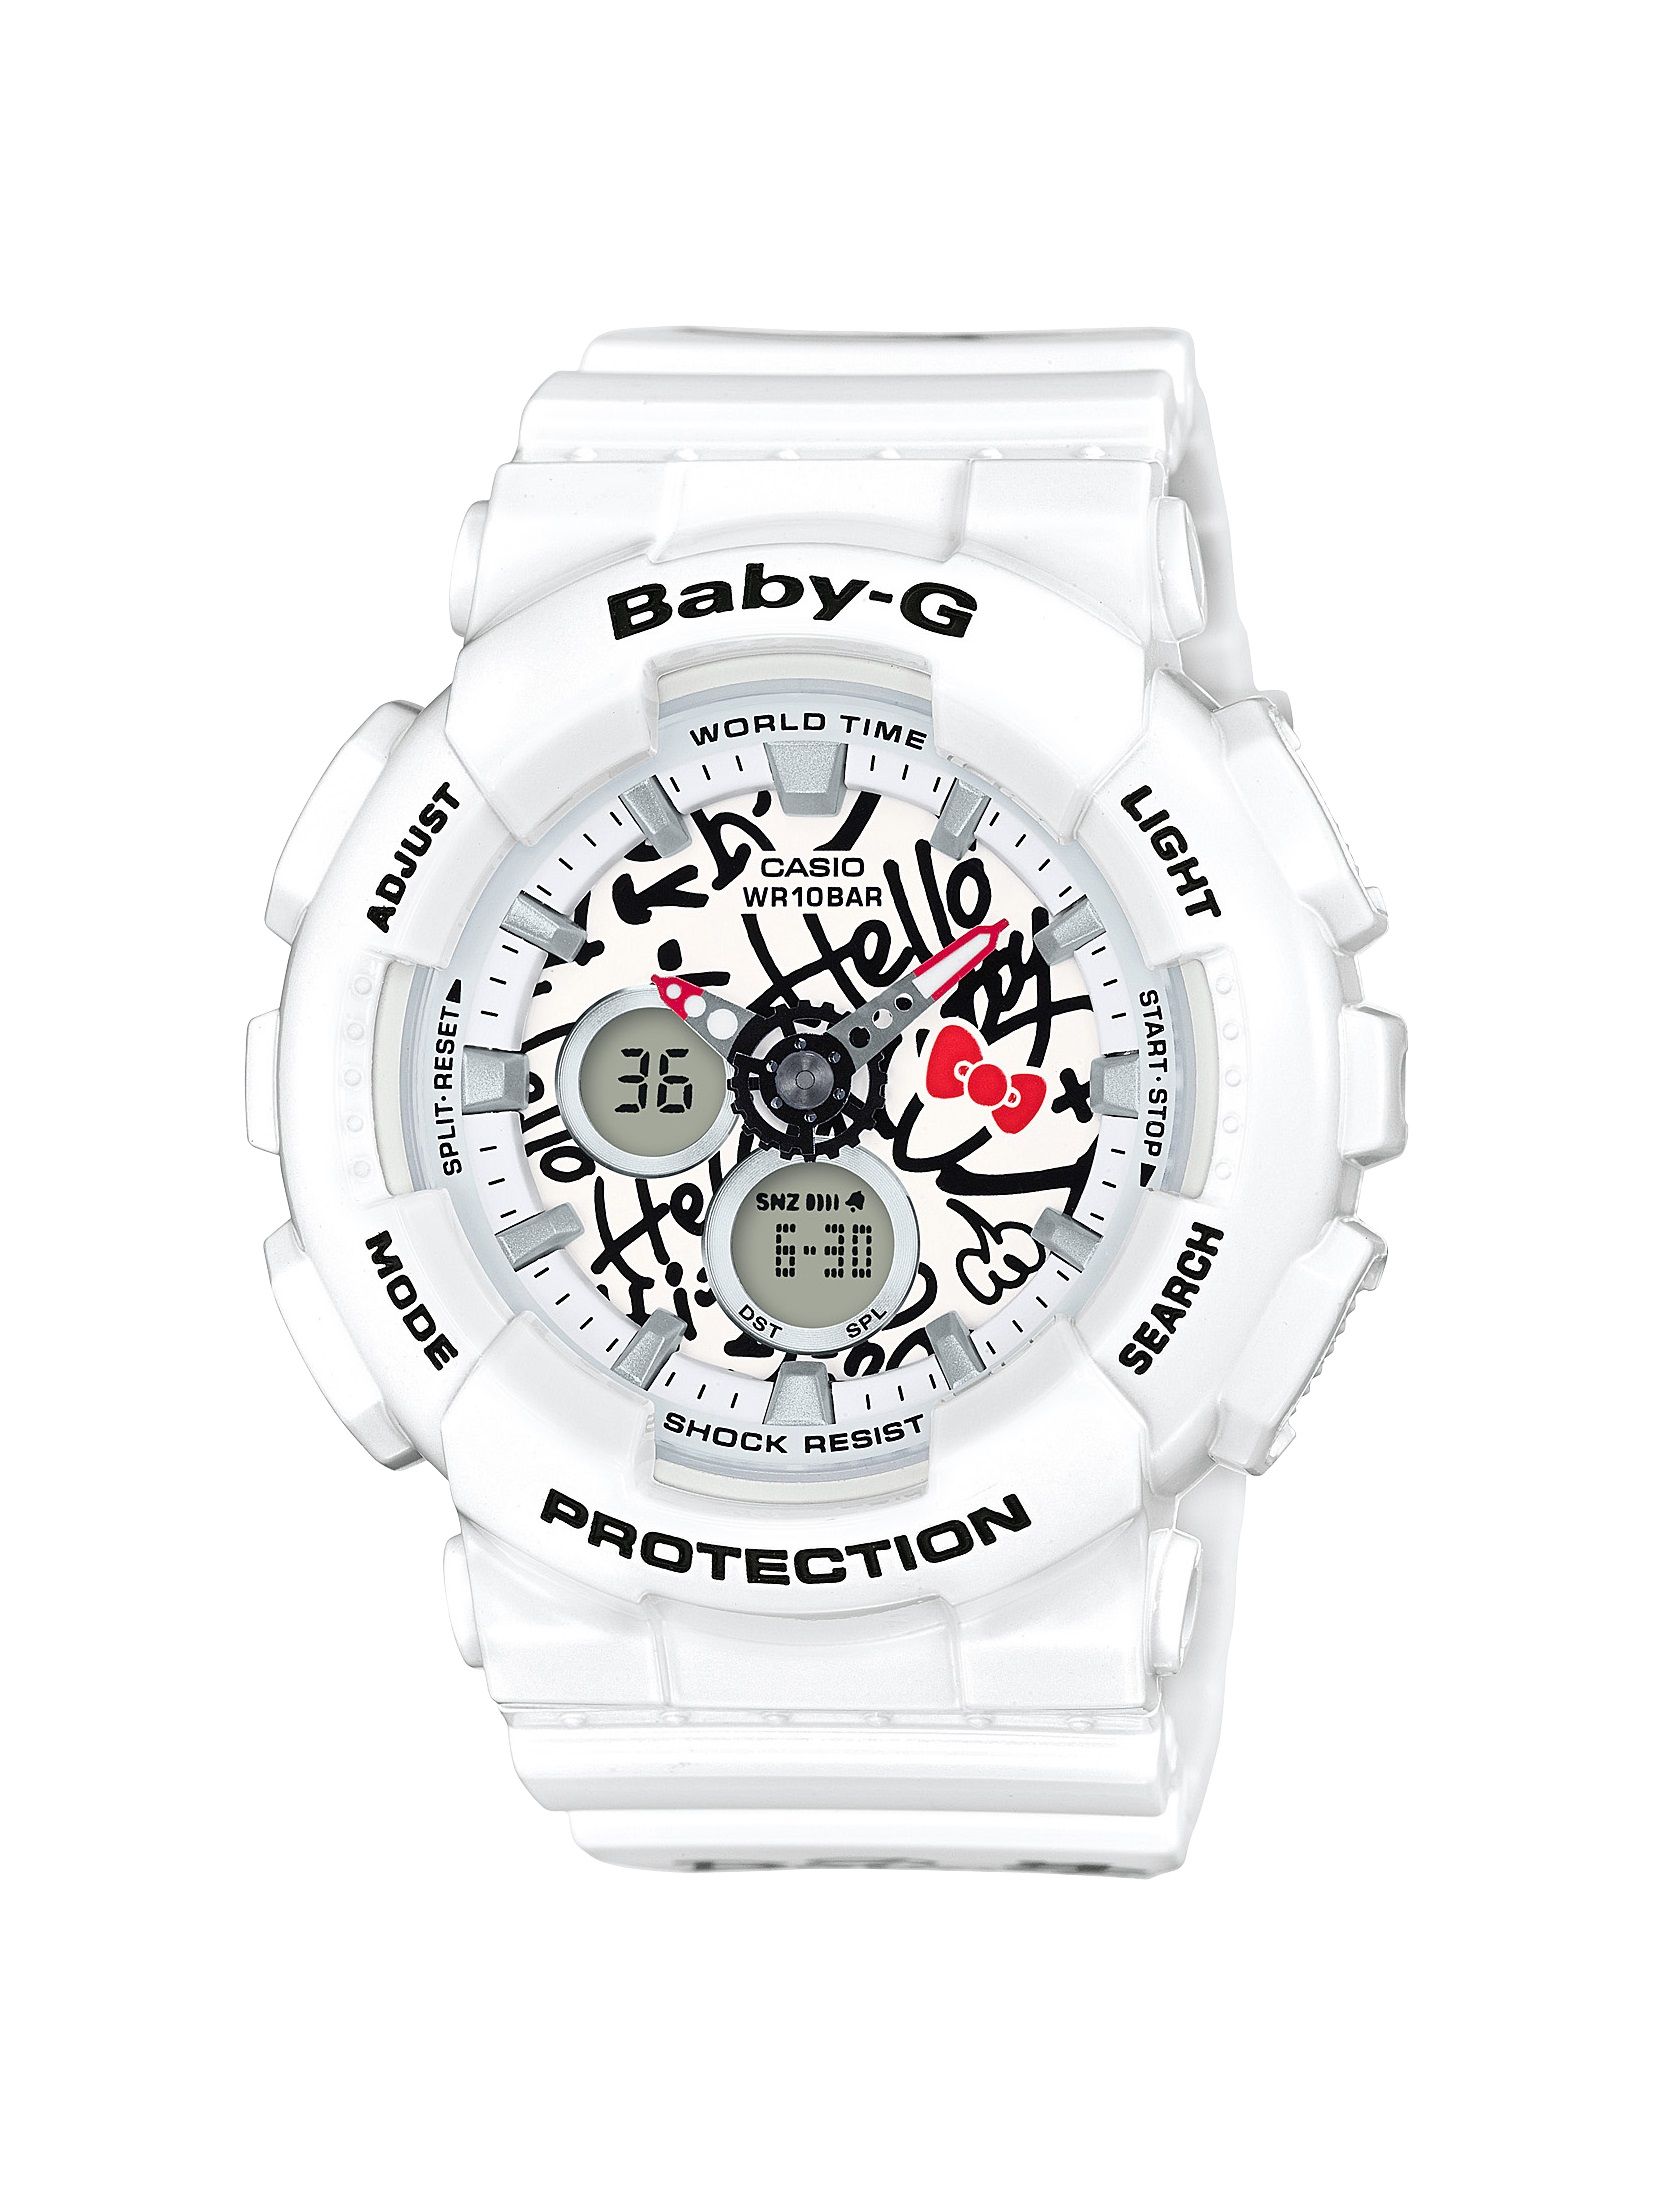 Casio to Release Hello Kitty Collaboration Baby-G Watch